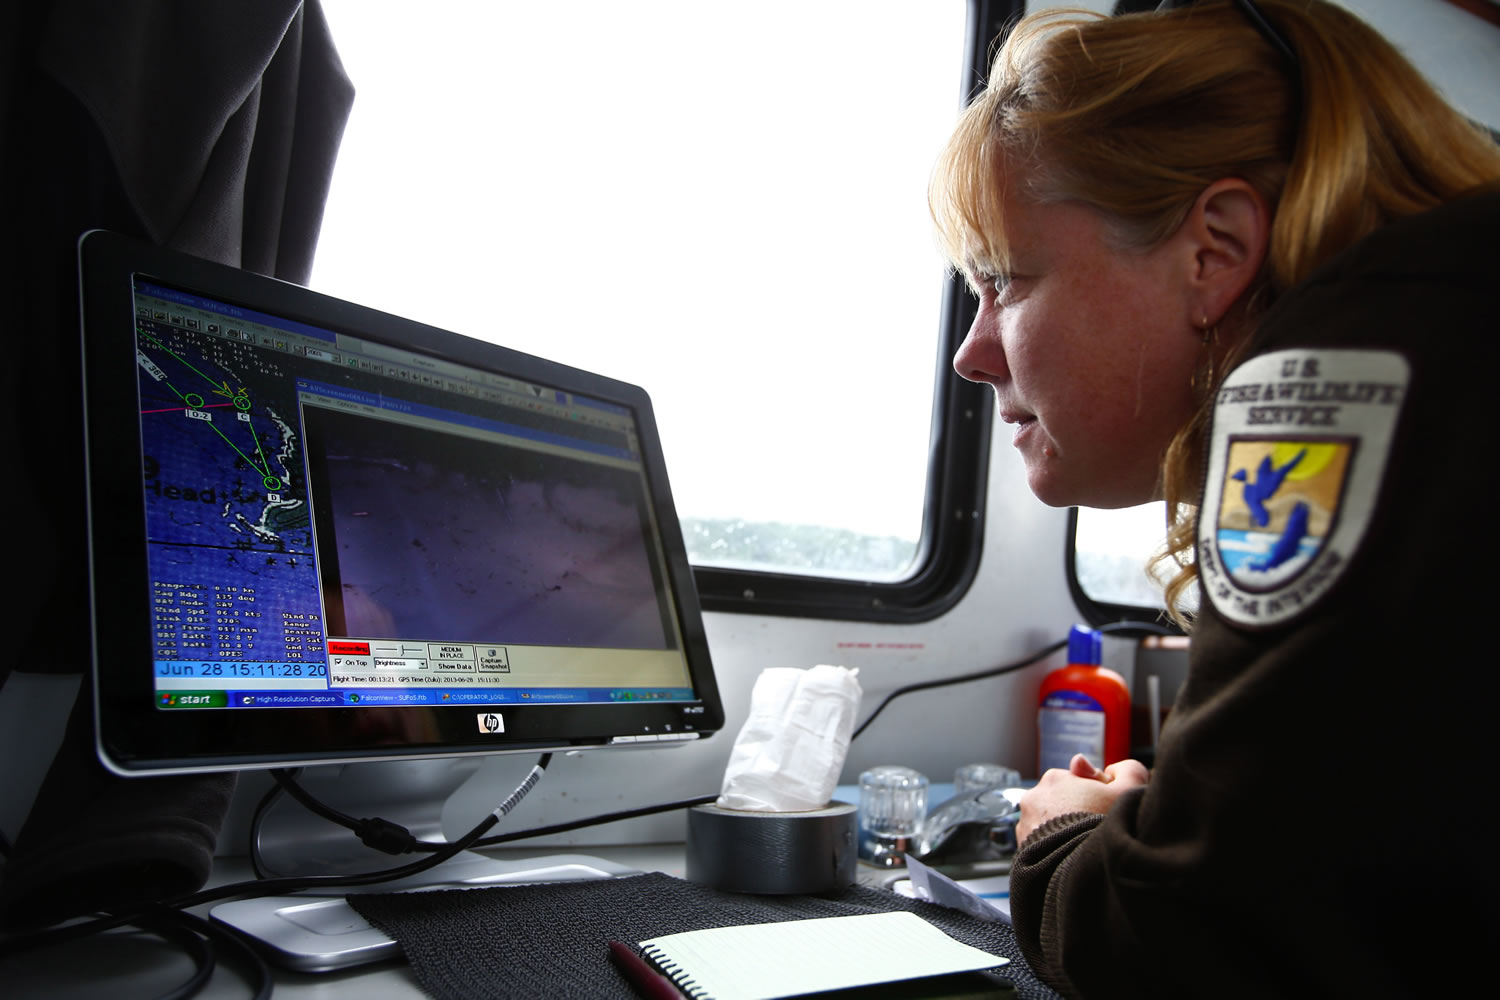 Sue Thomas, a wildlife biologist with the U.S. Fish and Wildlife Service, monitors the video feed coming from the Puma drone on the RV Tatoosh on June 28.